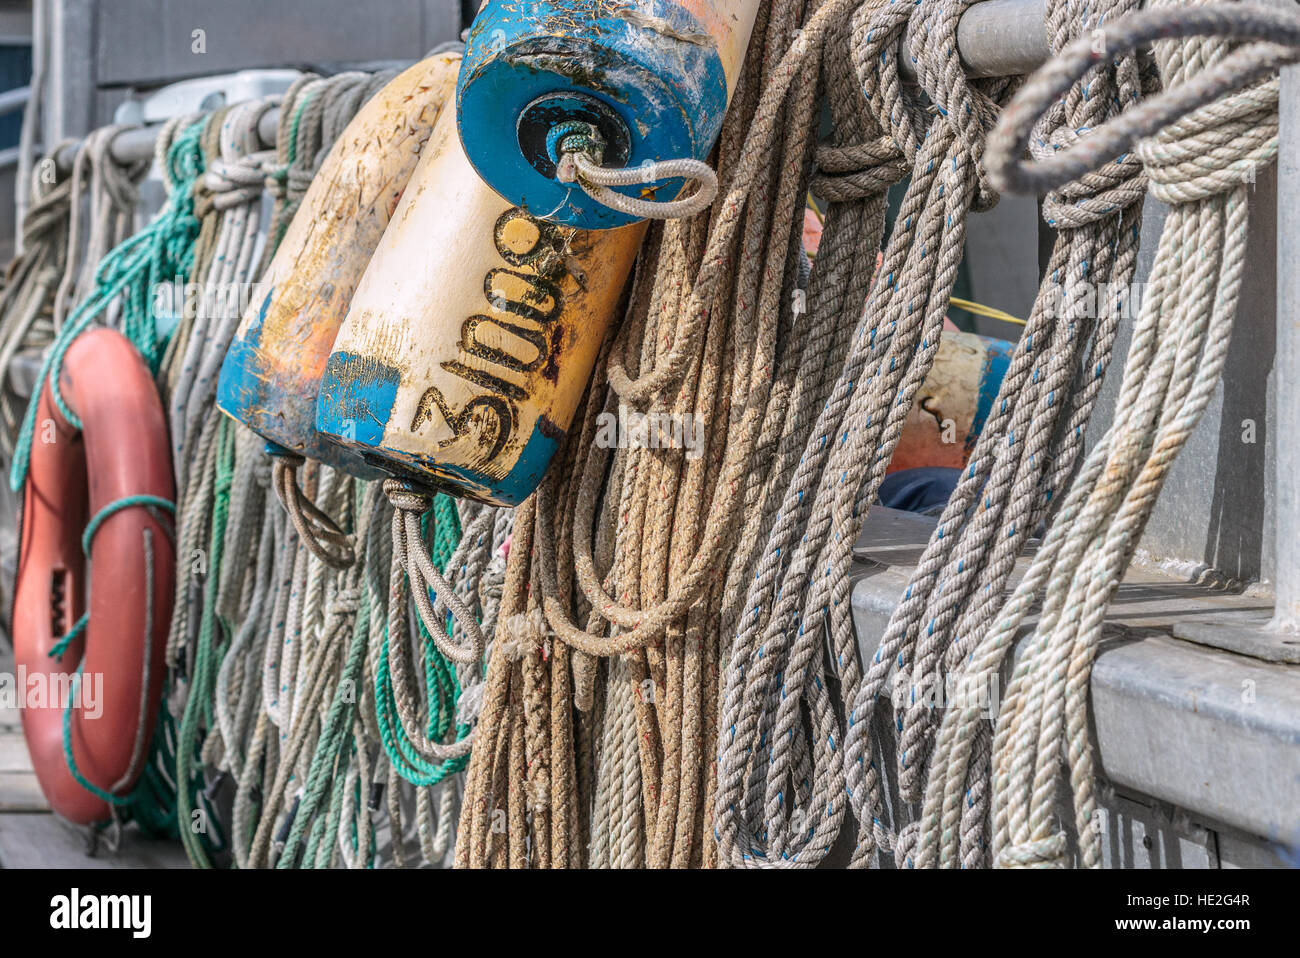 A close view of ropes, floats and a life ring hanging from the rail of a commercial fishing boat on Canada's west coast. Stock Photo